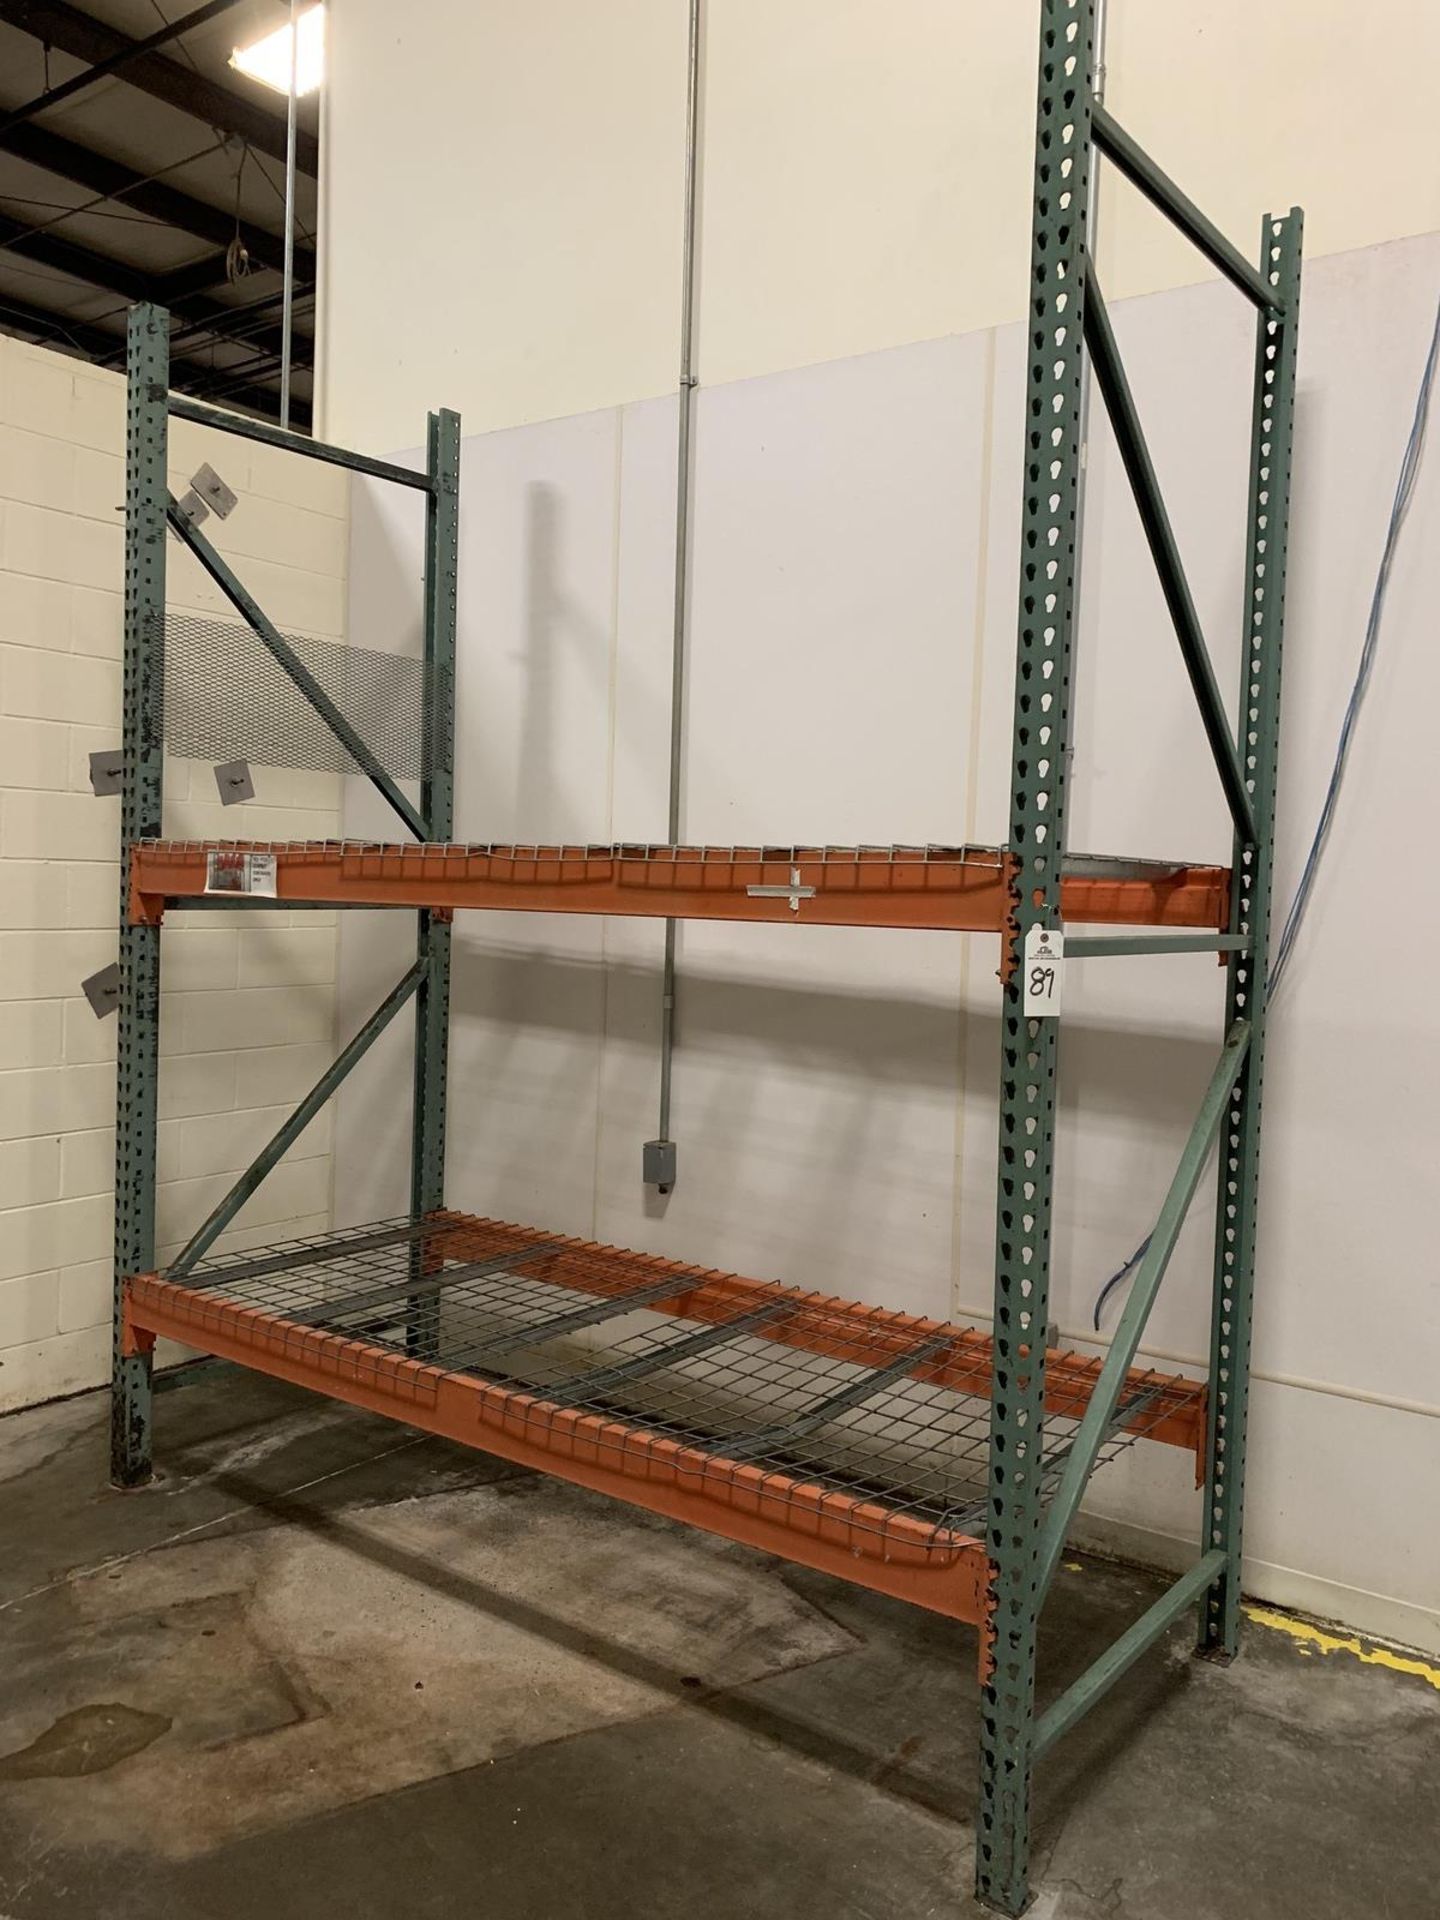 Section of Pallet Racking Pictured | Rig Fee: 100